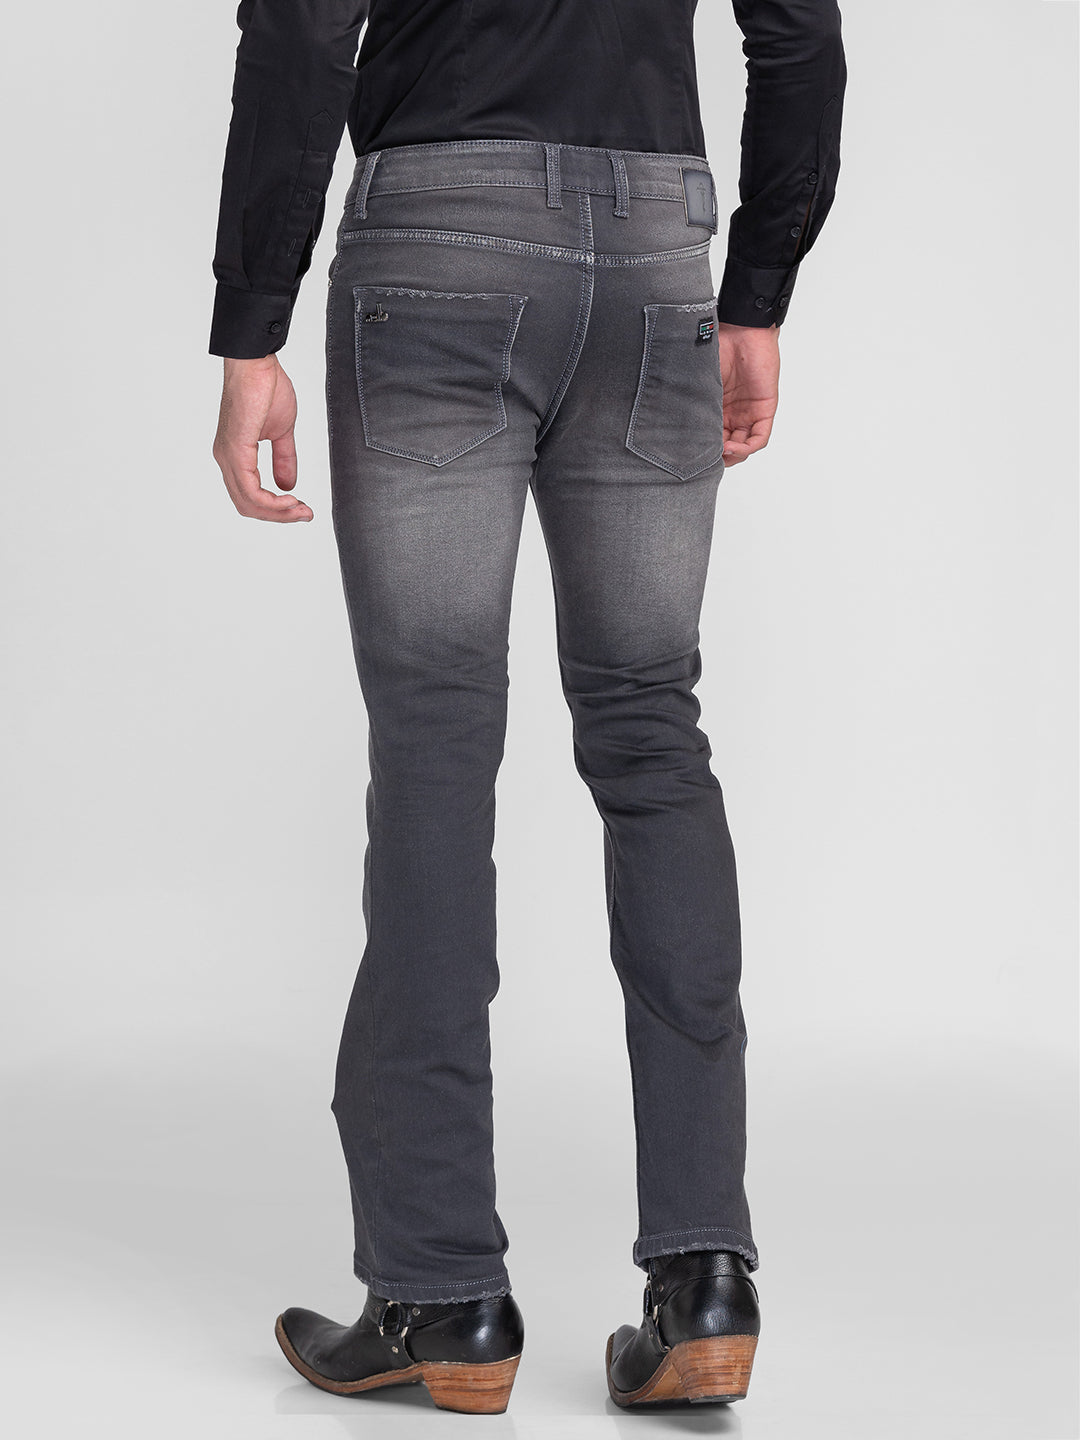 Grey Bootcut Jeans for Men